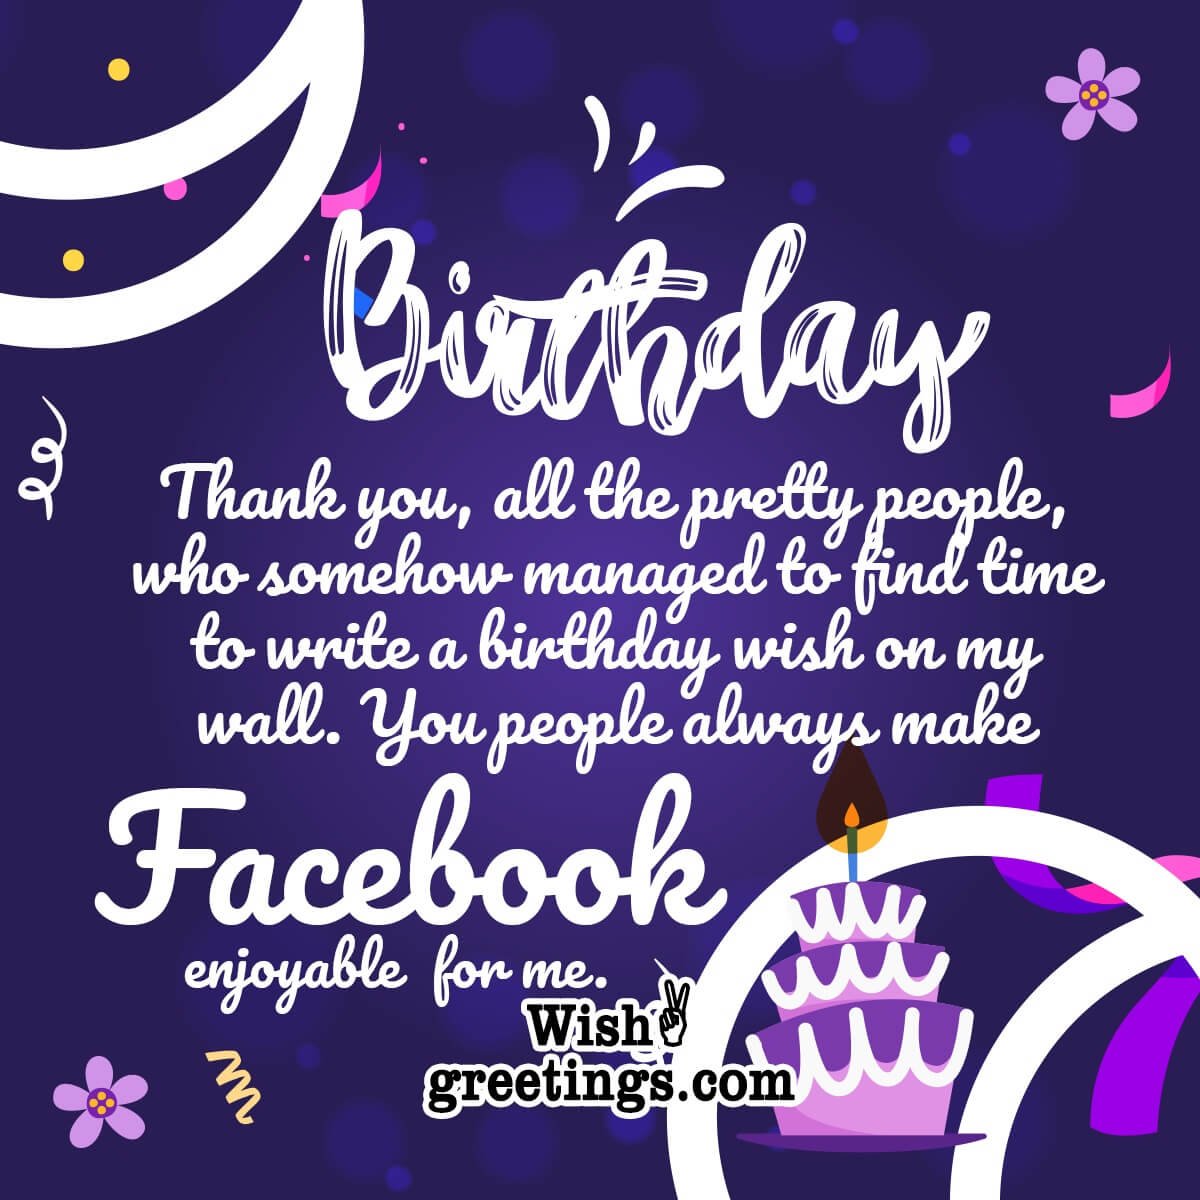 Thank You for Birthday Wishes on Facebook Wish Greetings